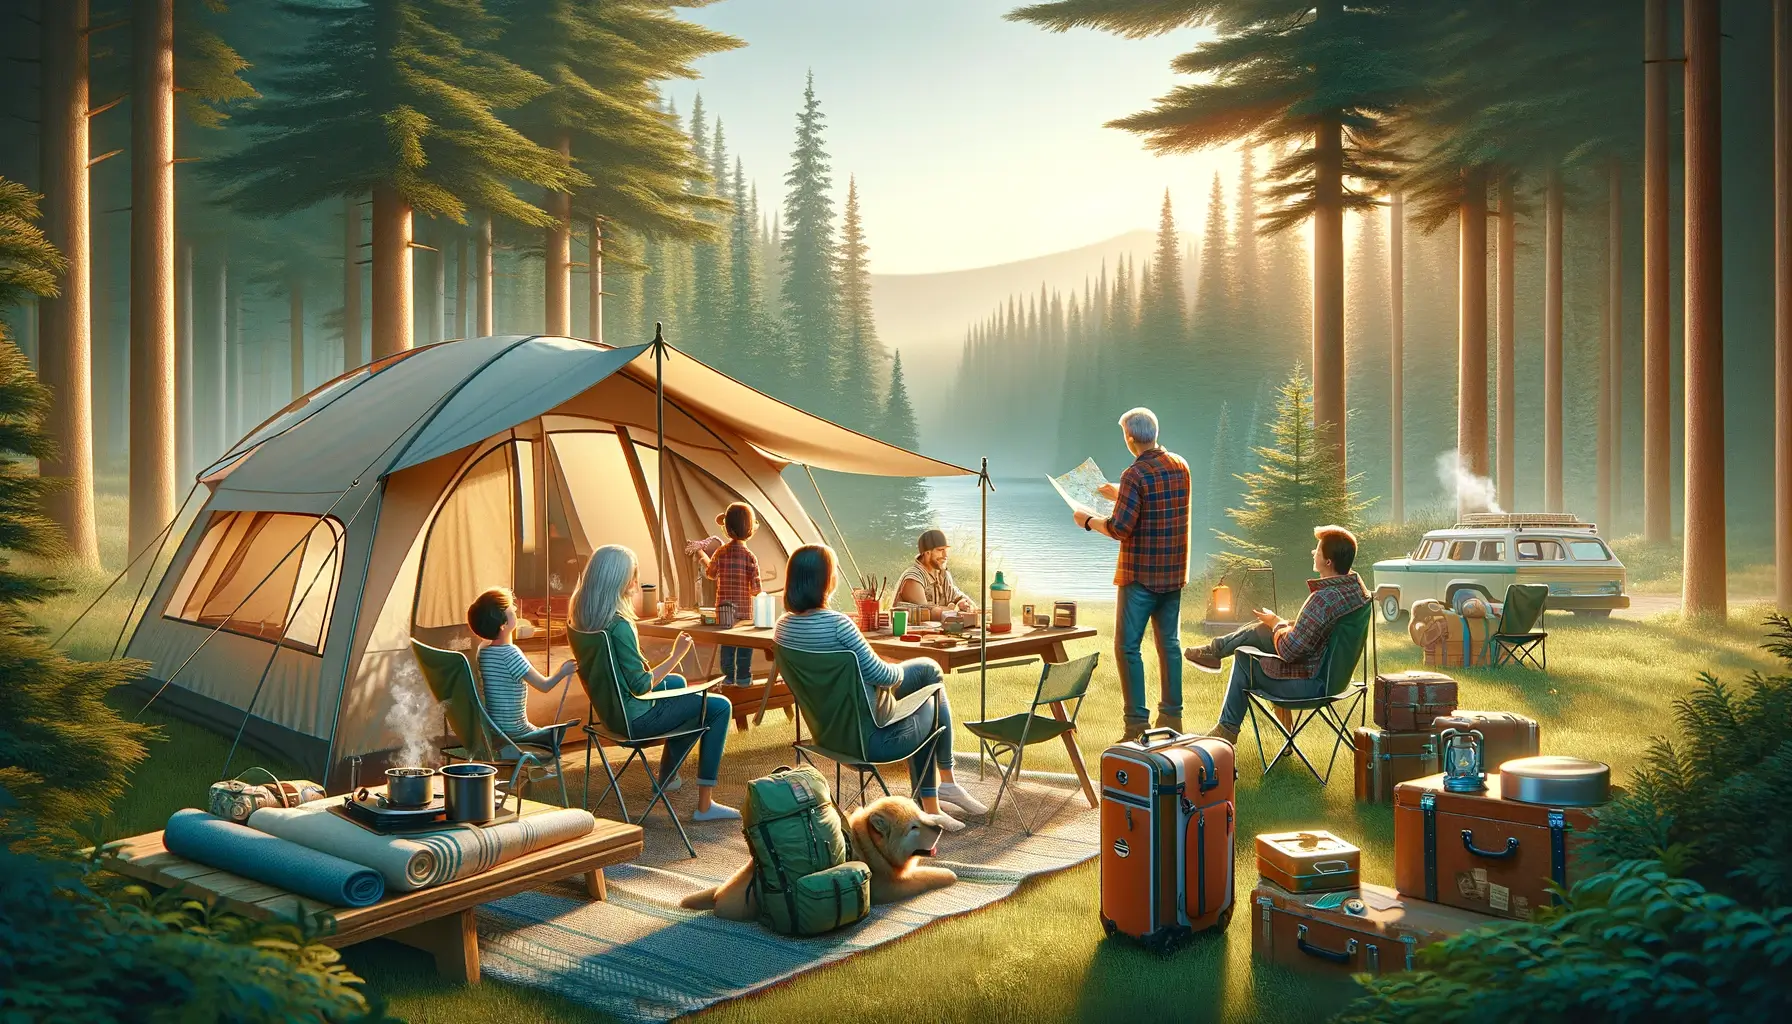 Planning a Successful Family Camping Trip